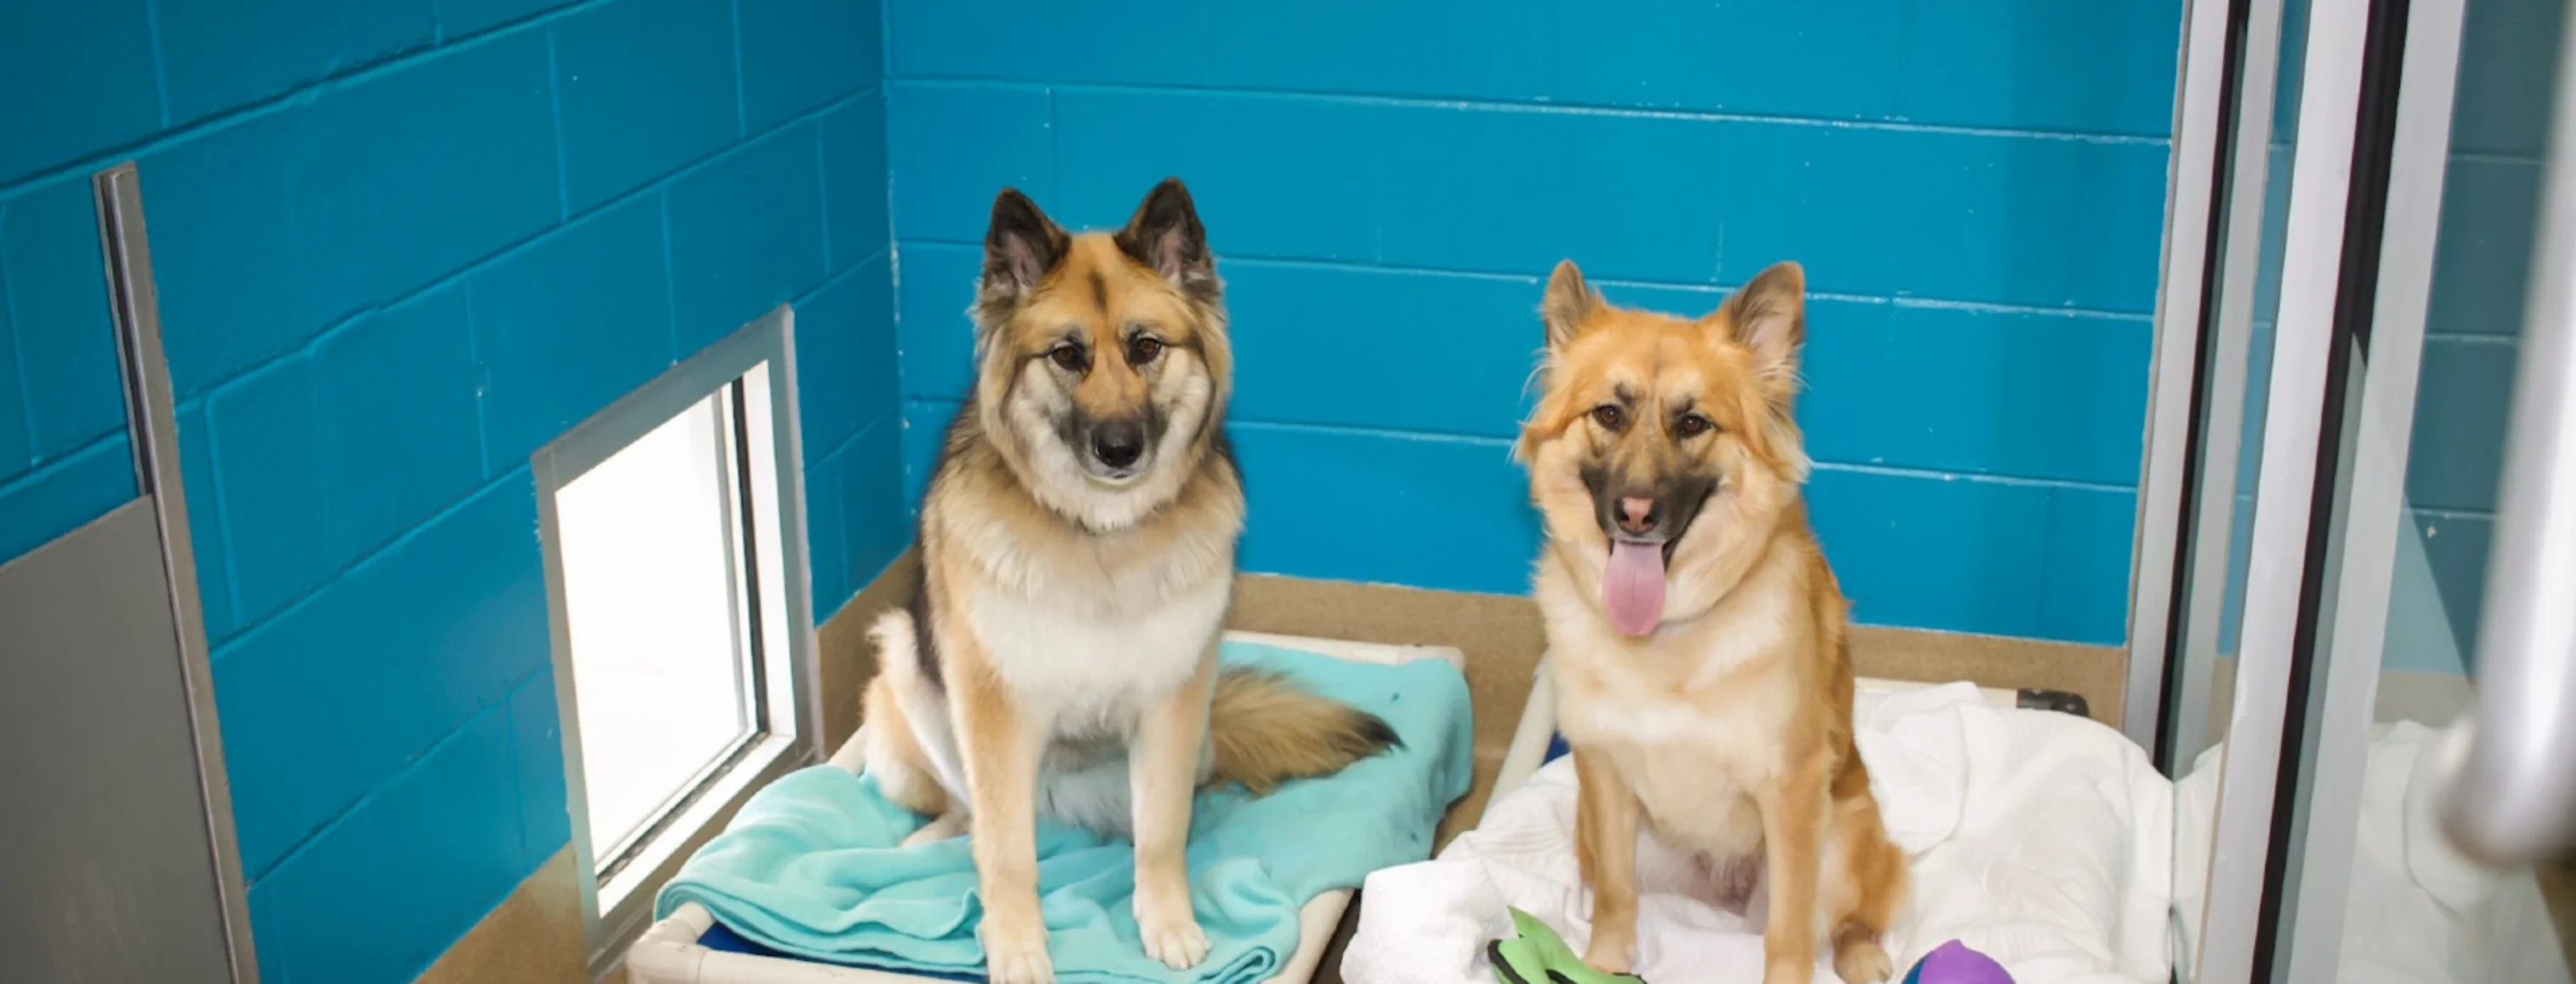 2 large dogs sitting on dog beds in spacious boarding kennel